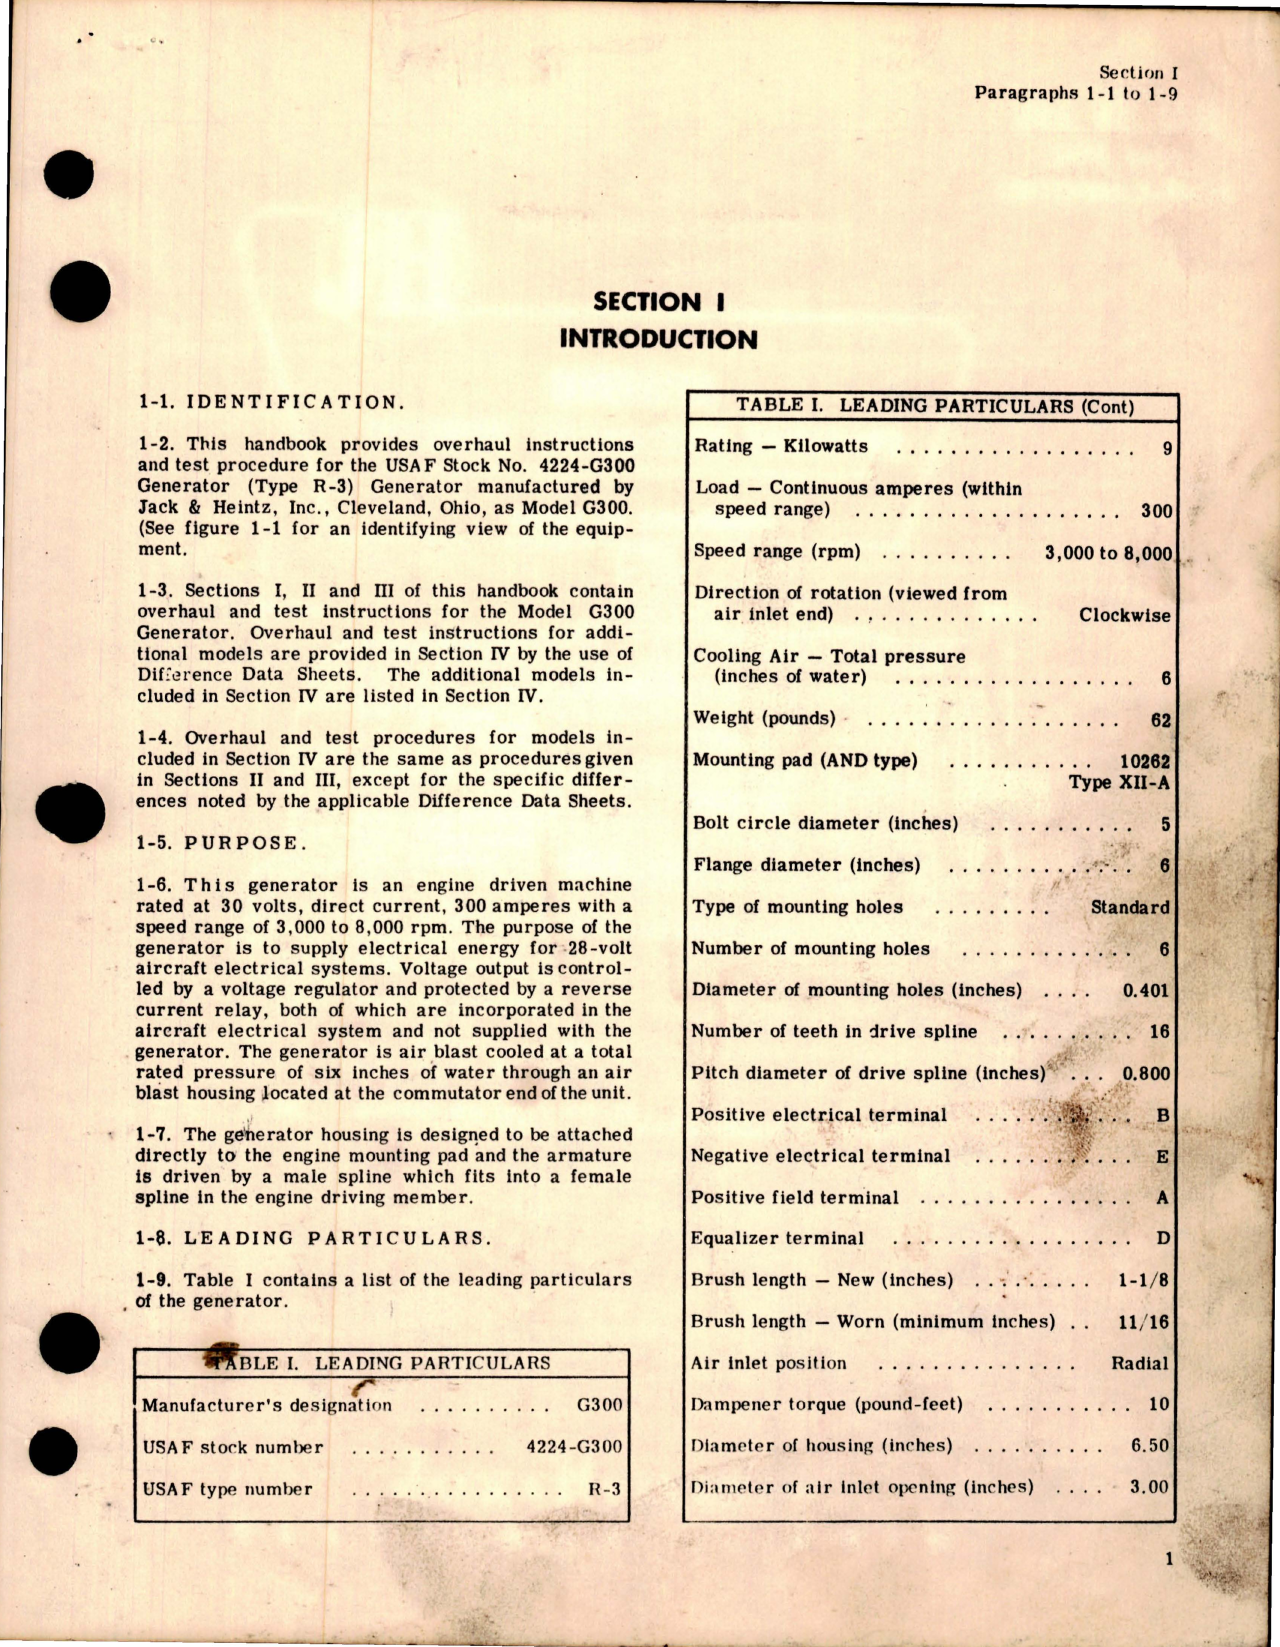 Sample page 5 from AirCorps Library document: Overhaul Instructions for Generator - Model G300 Series 